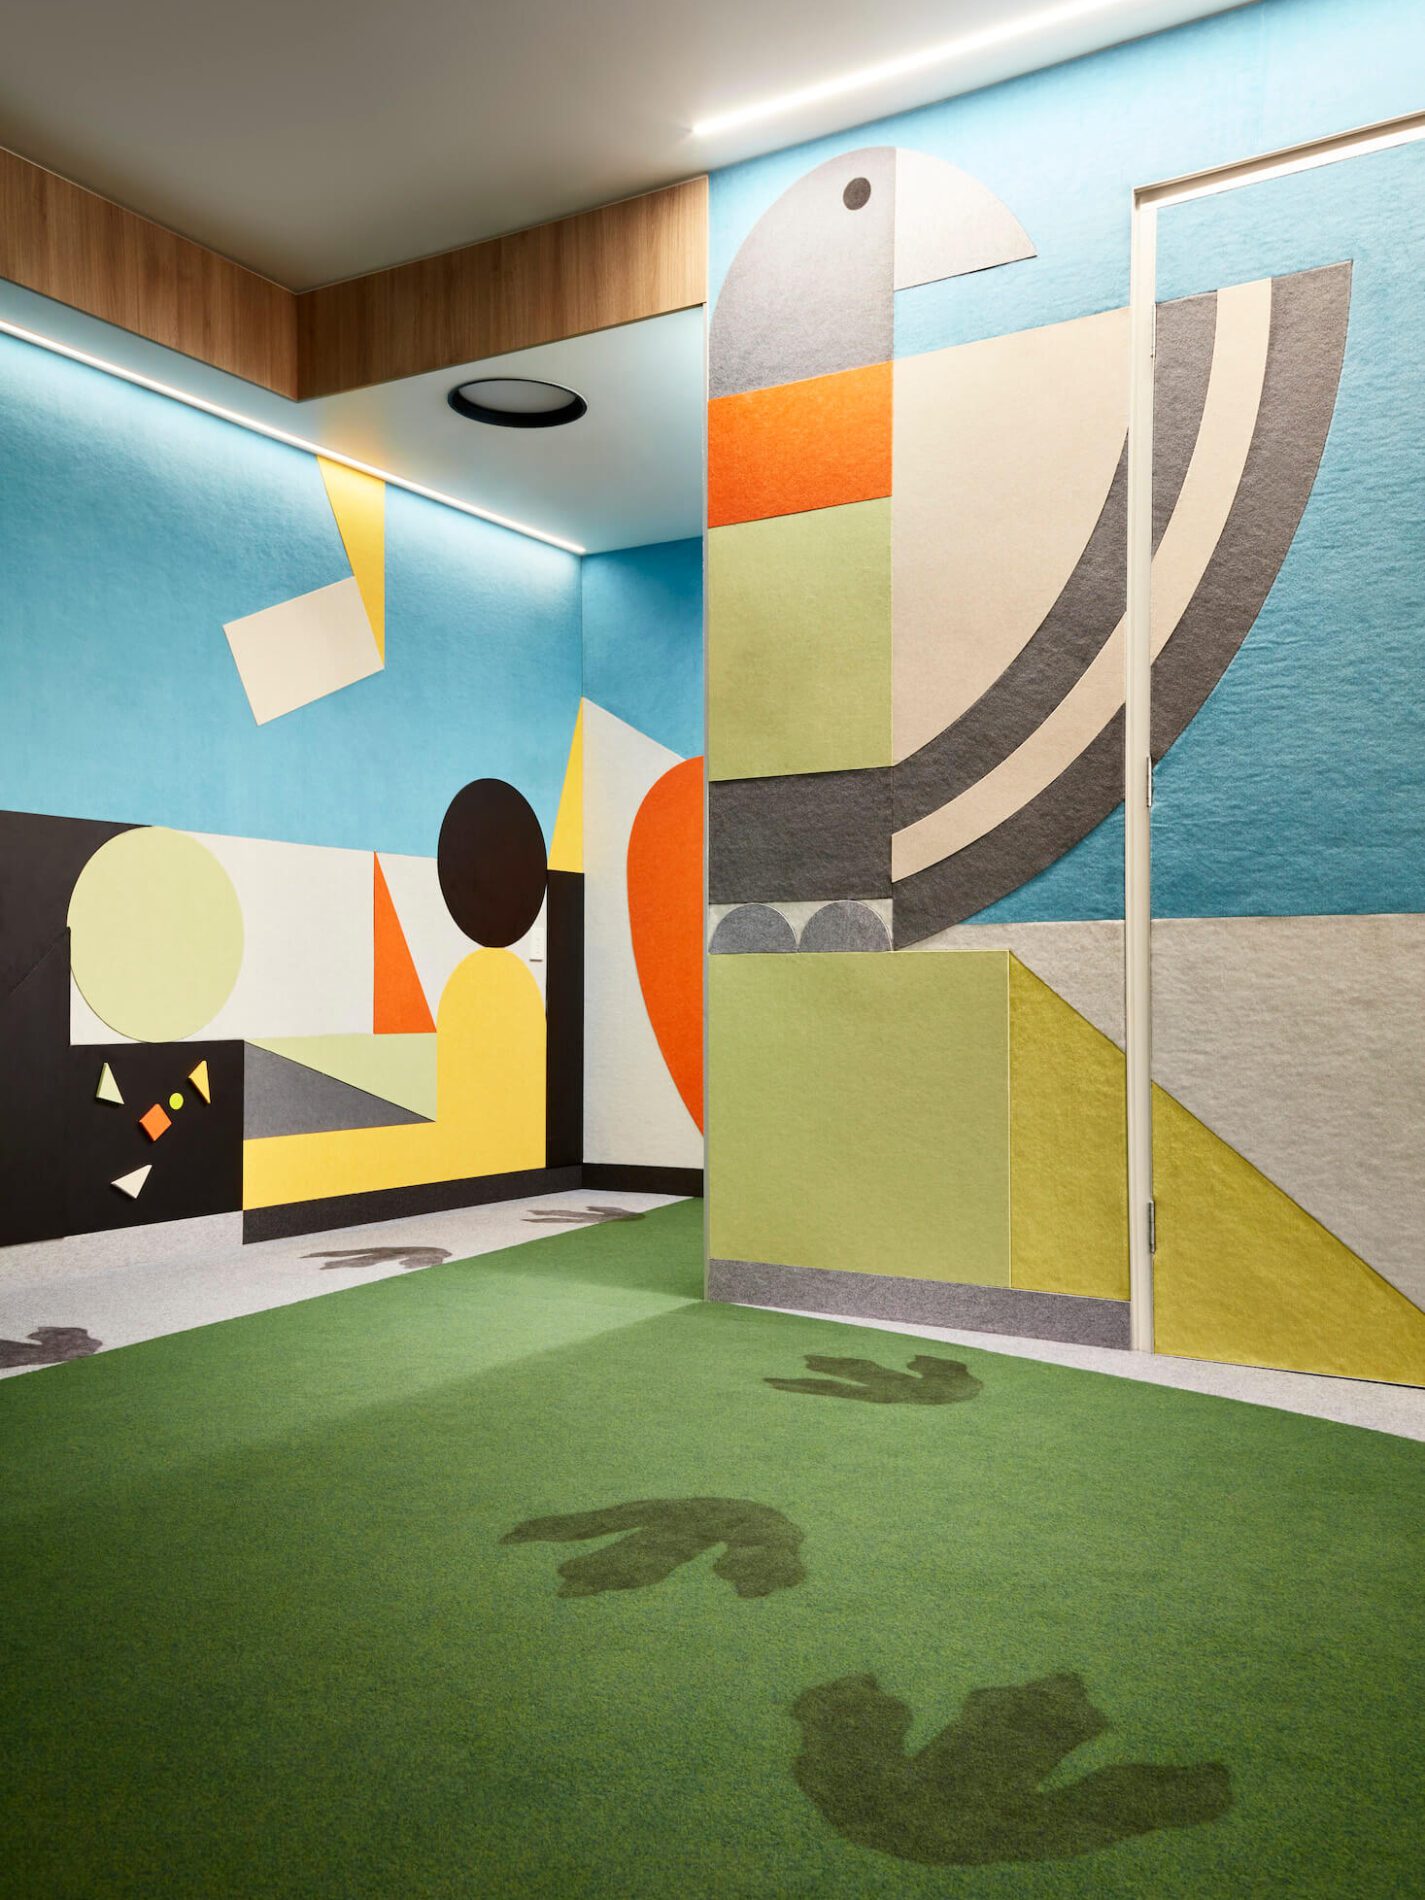 Felt eagle design on walls leading into children's cubby at Children's Court of Victoria